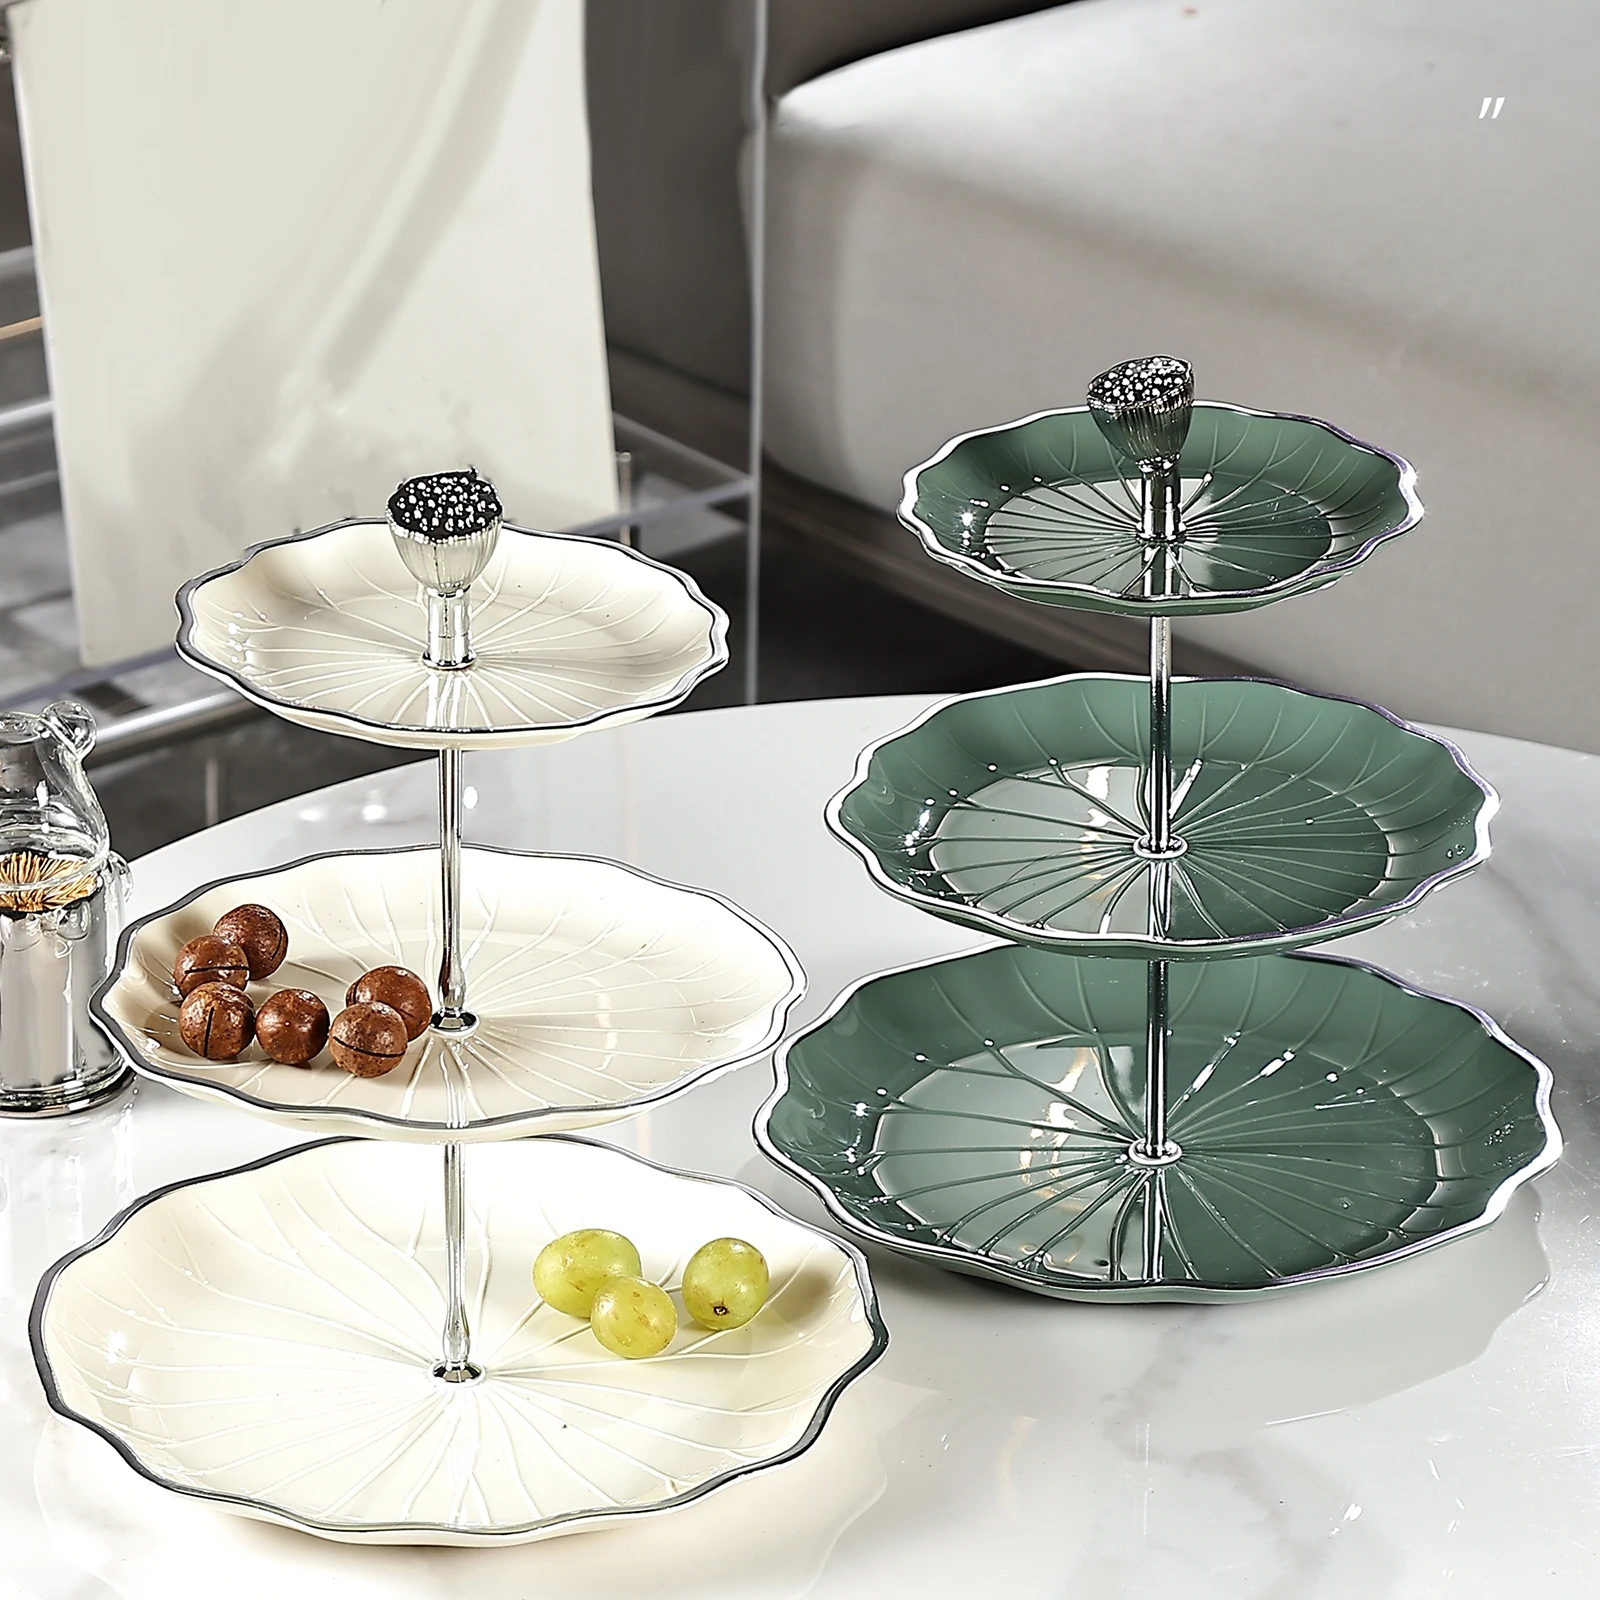 https://ae01.alicdn.com/kf/Se335ea1d1b61455091c01fe3637daa73J/2-Tier-Cupcake-Stand-Ceramic-Elegant-Dessert-Plates-Stand-Serving-Tray-Containers-for-Cookies-Birthday-Home.jpg